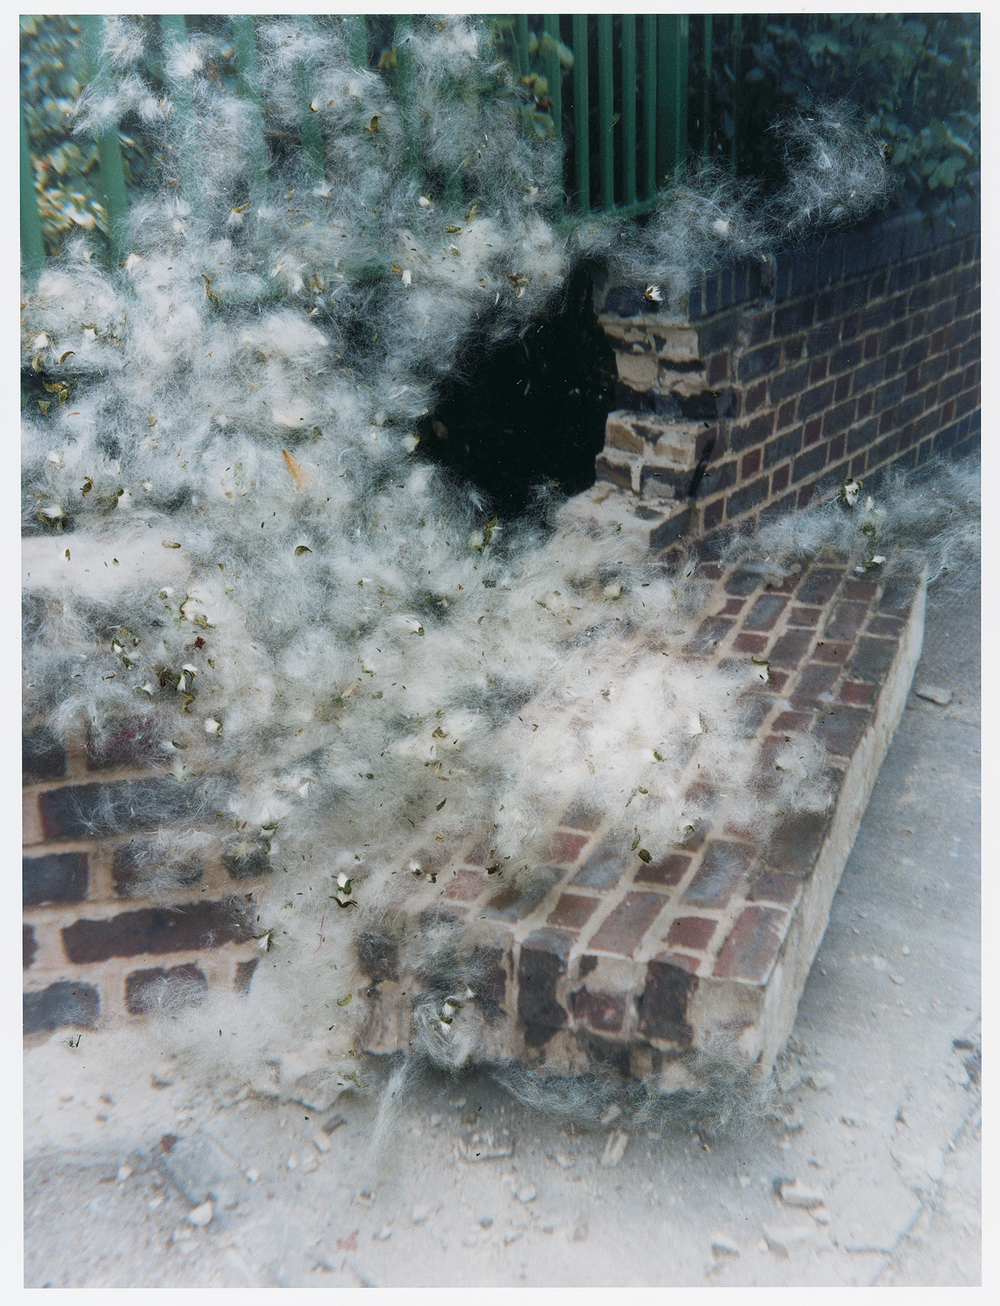 "Untitled" from the series Hackney Flowers, 2005 - 2007